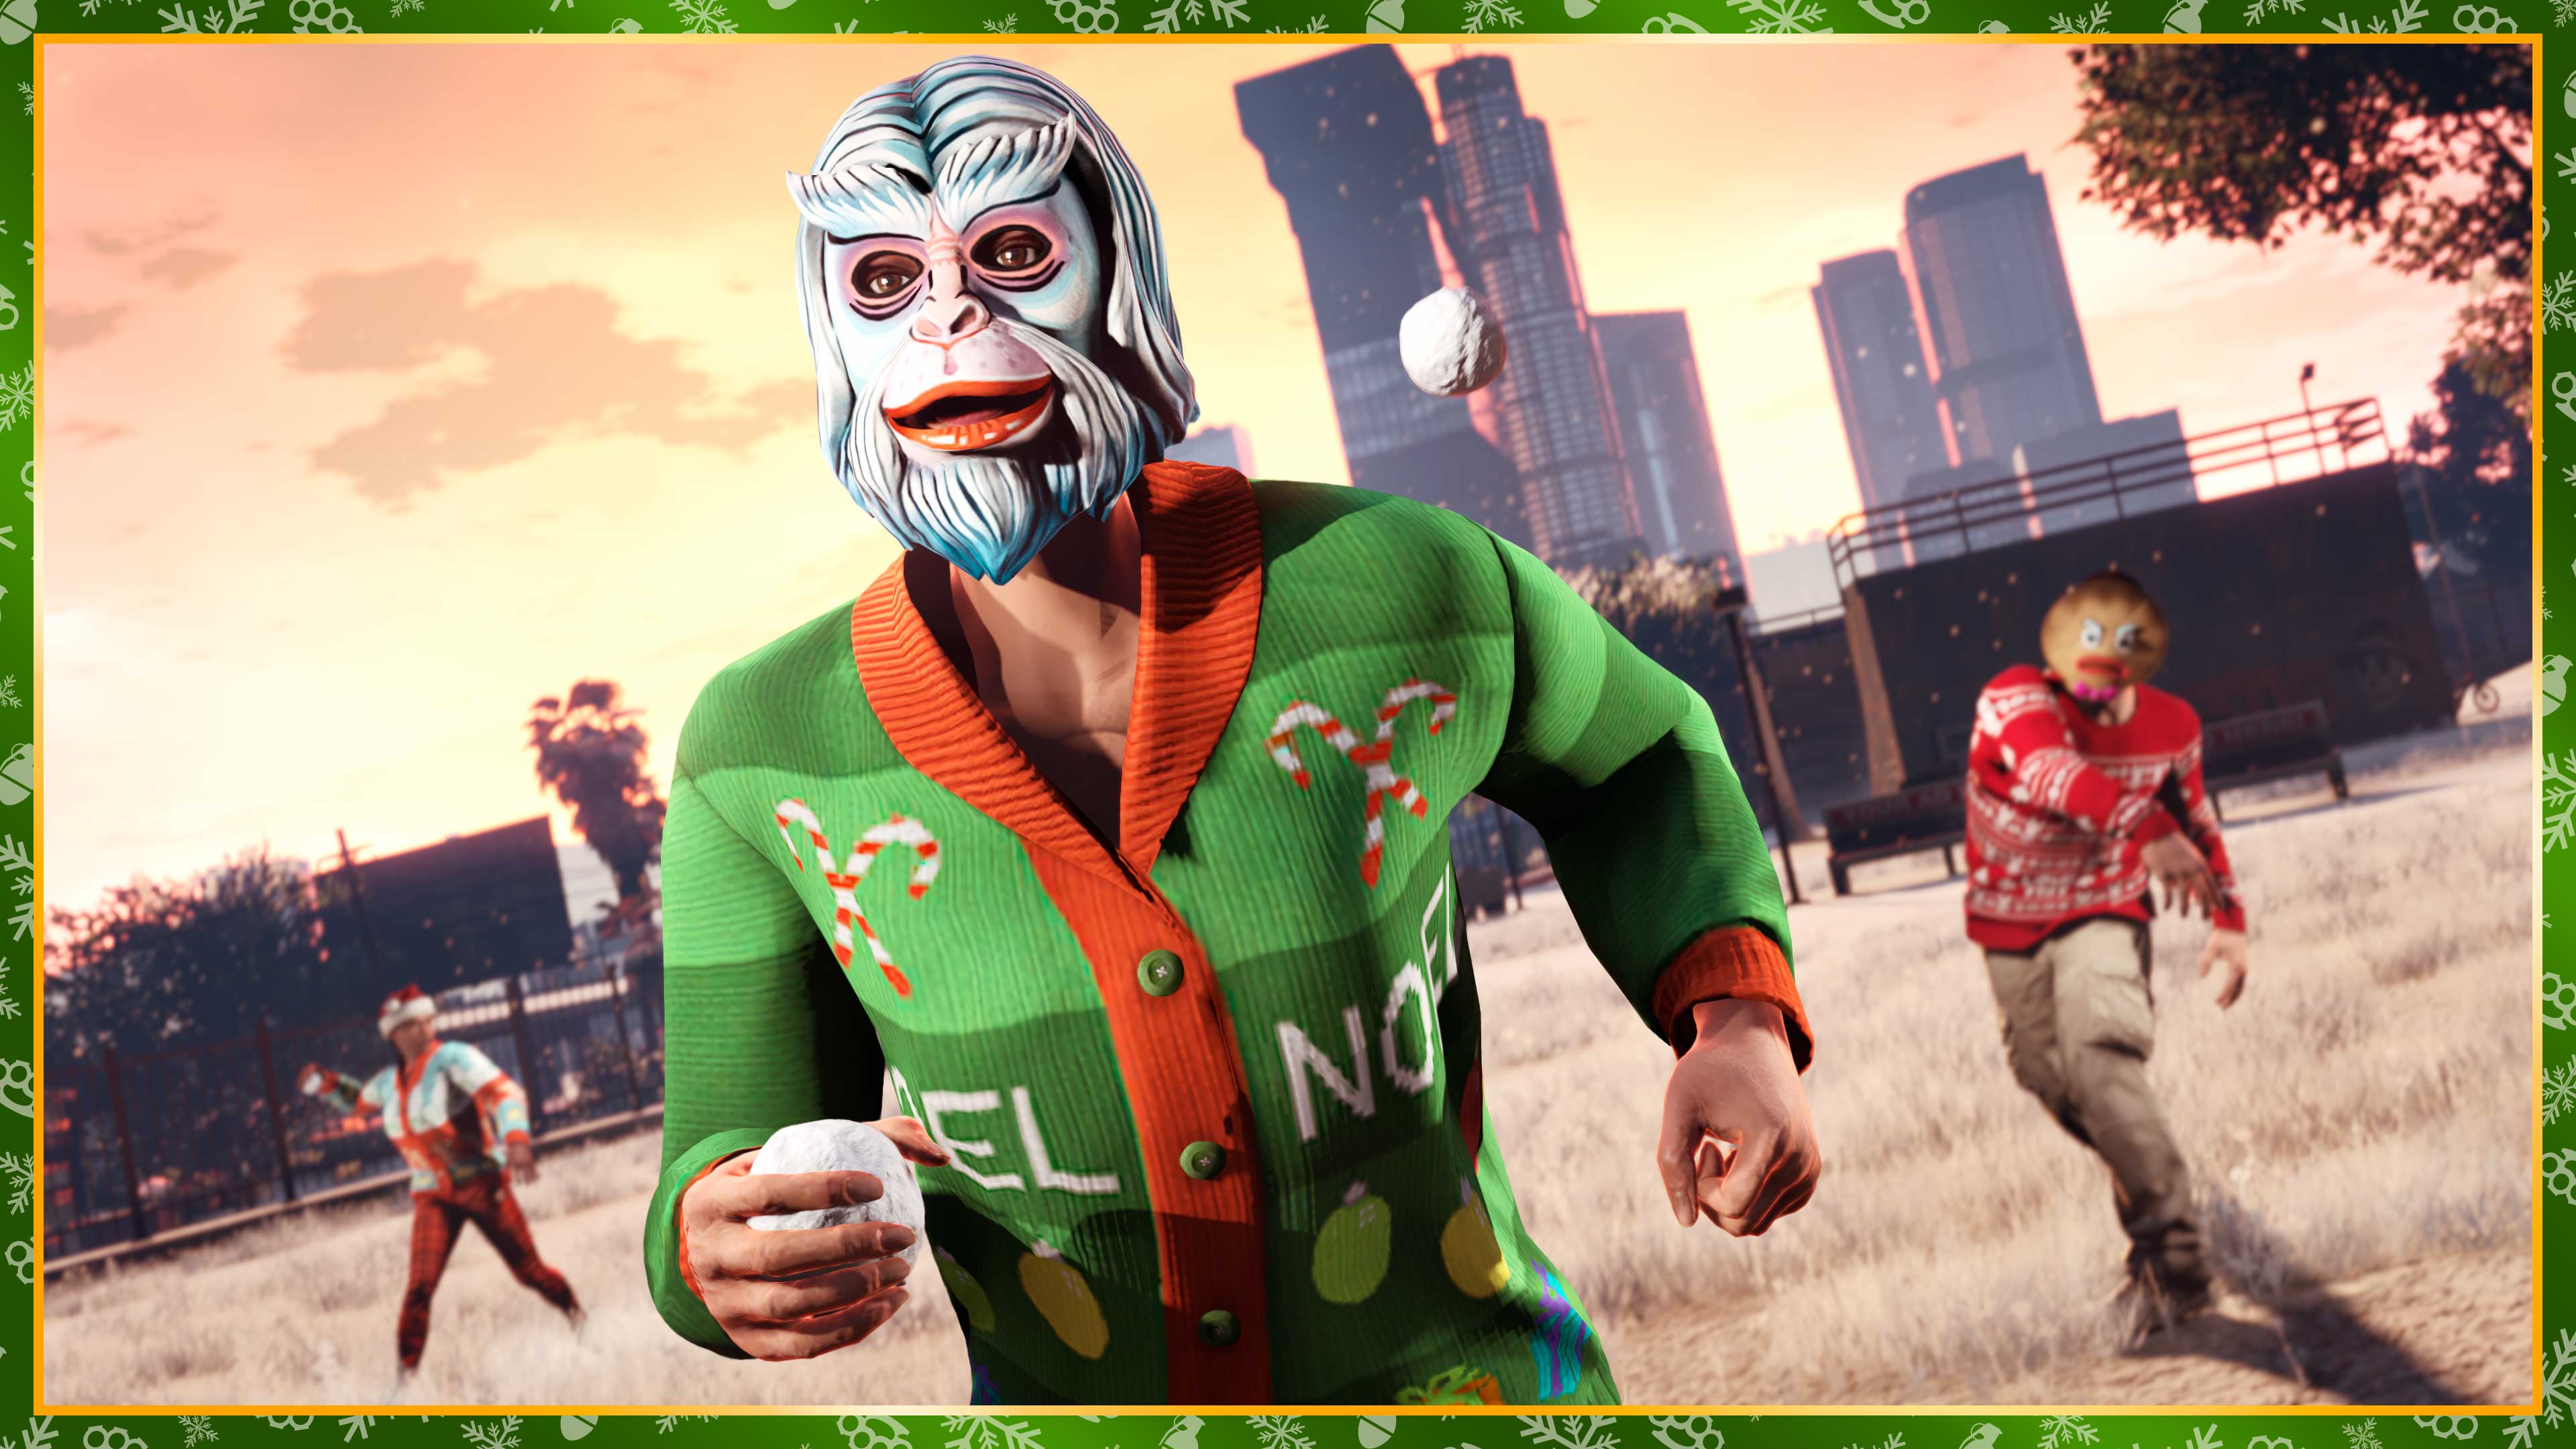 Celebrate the Holiday Season with the GTA Online Festive Surprise